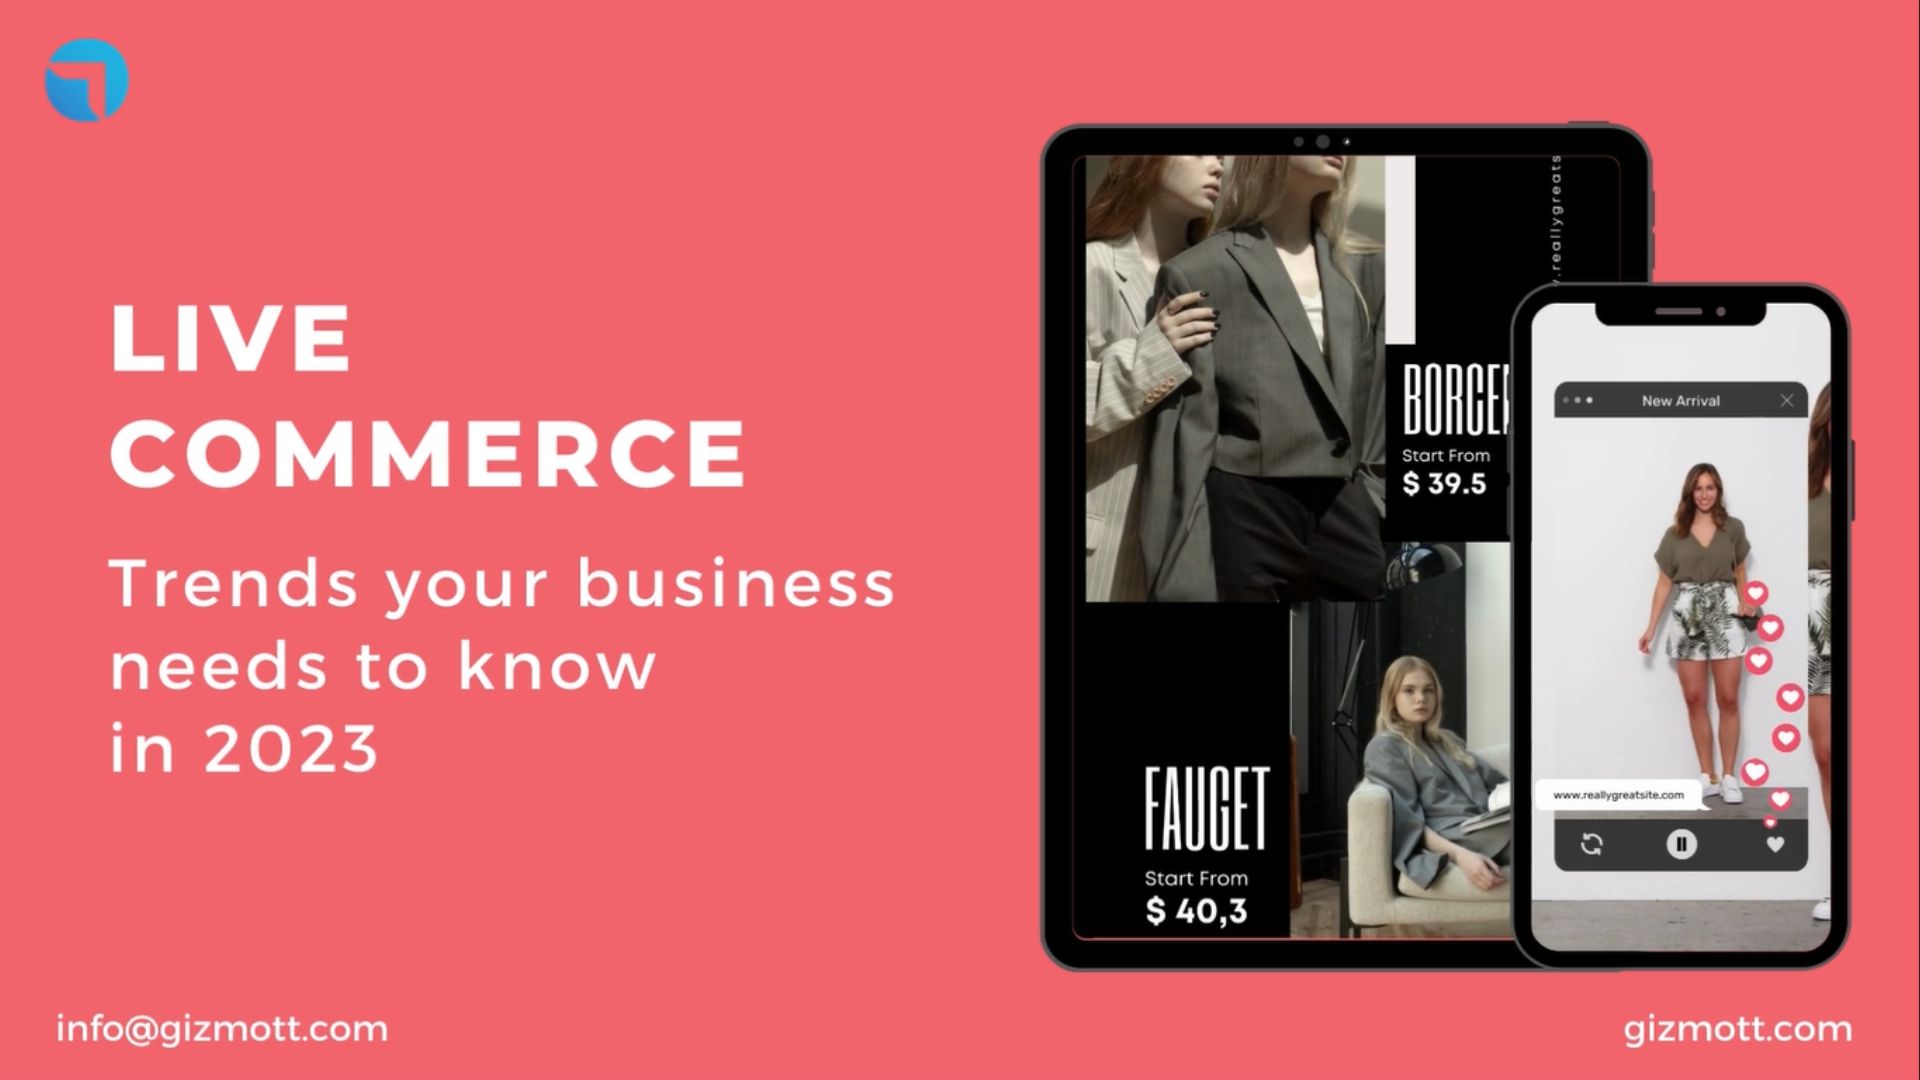 Live commerce trends you need to know in 2023